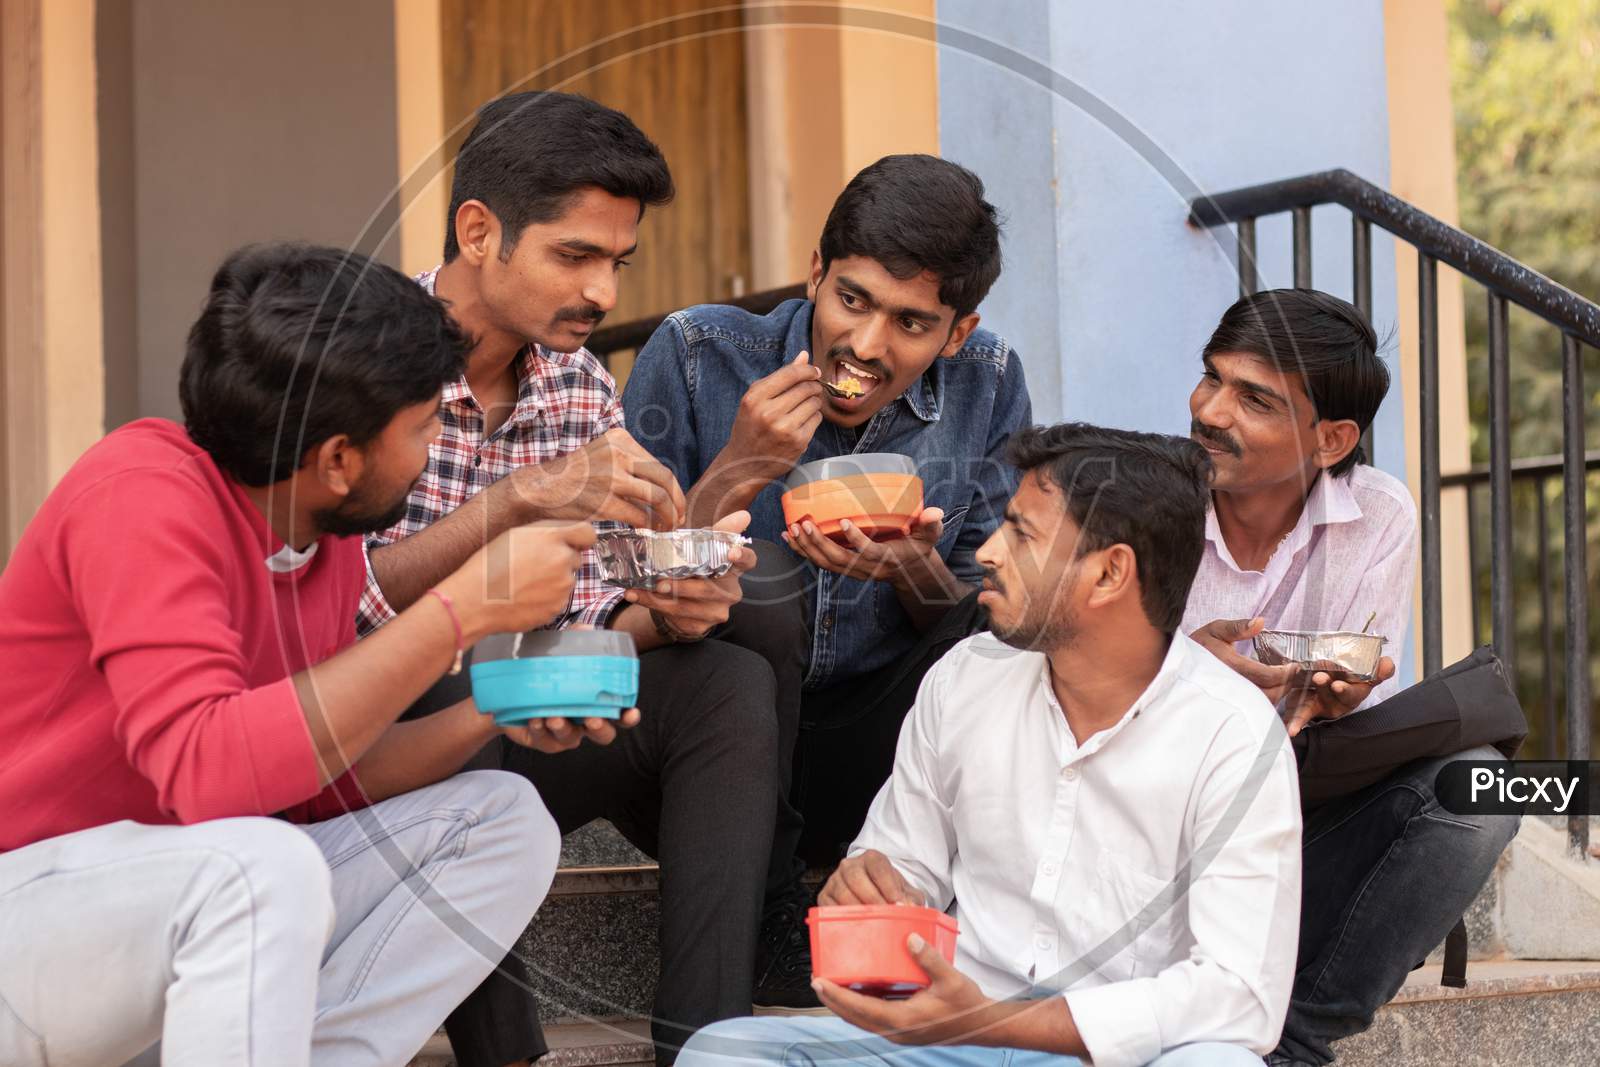 A Group of Young Men's having Lunch together At a University Campus or College Campus